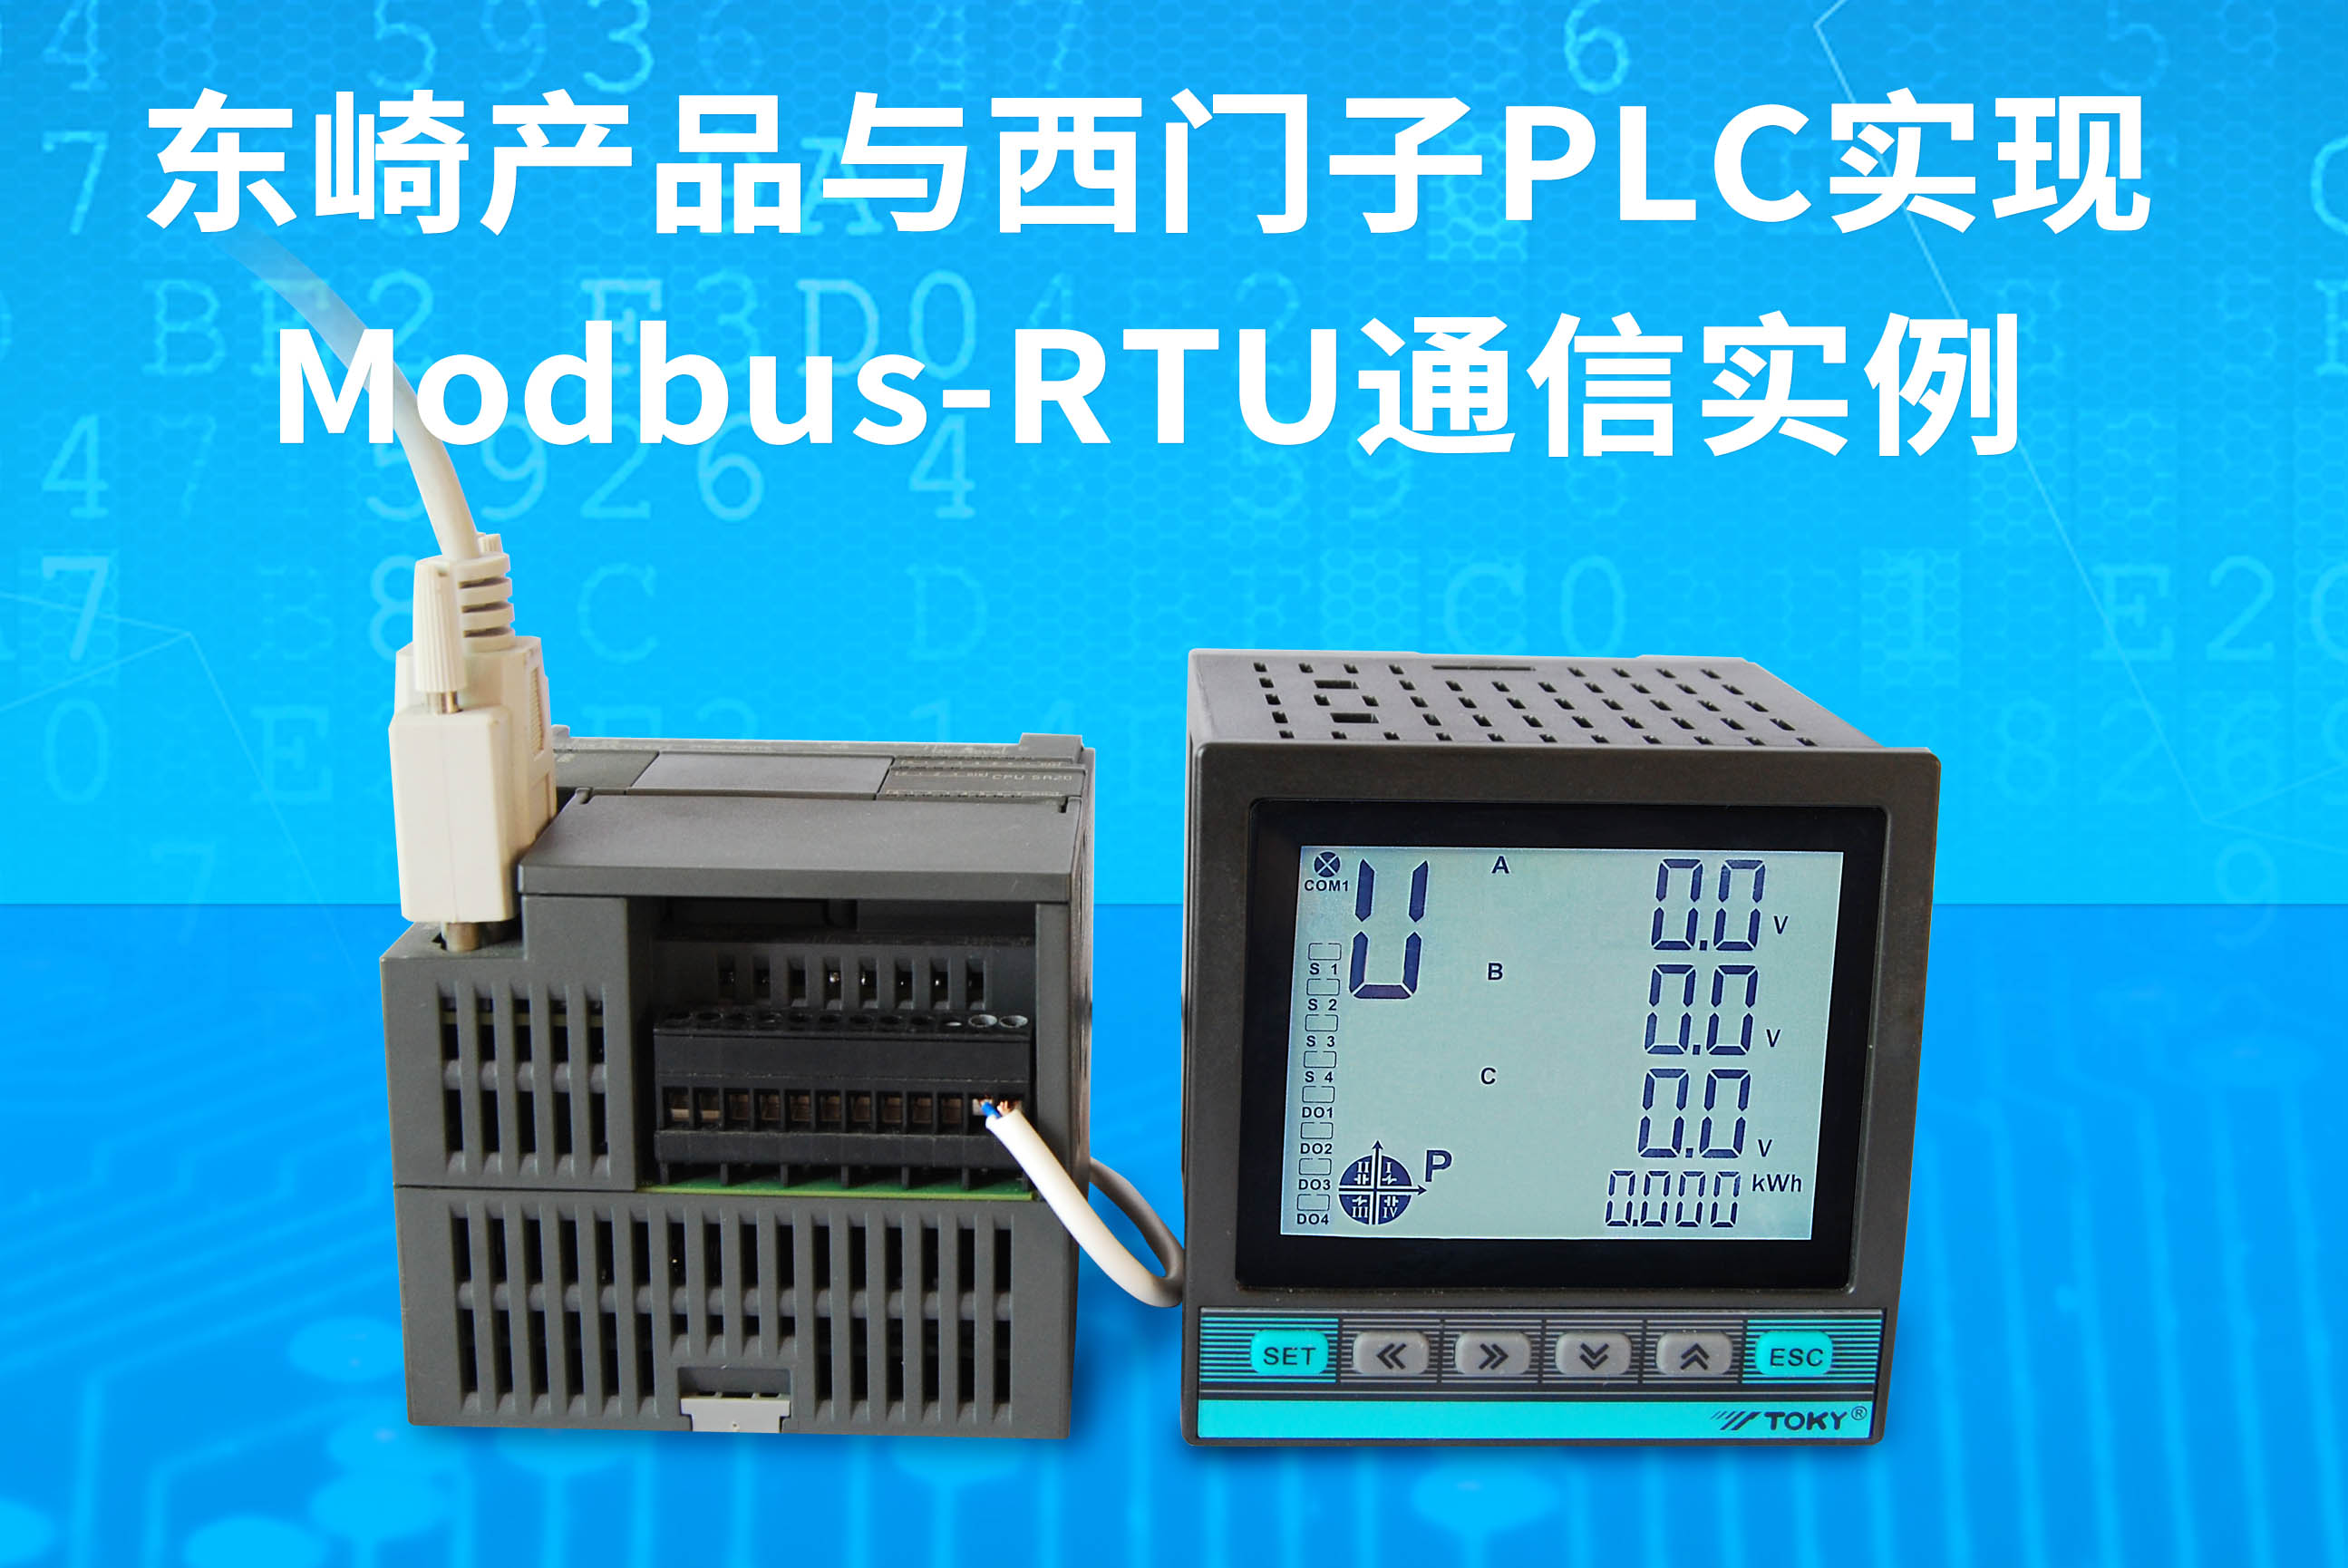 Example of Modbus-RTU communication between Toky products and Siemens PLC